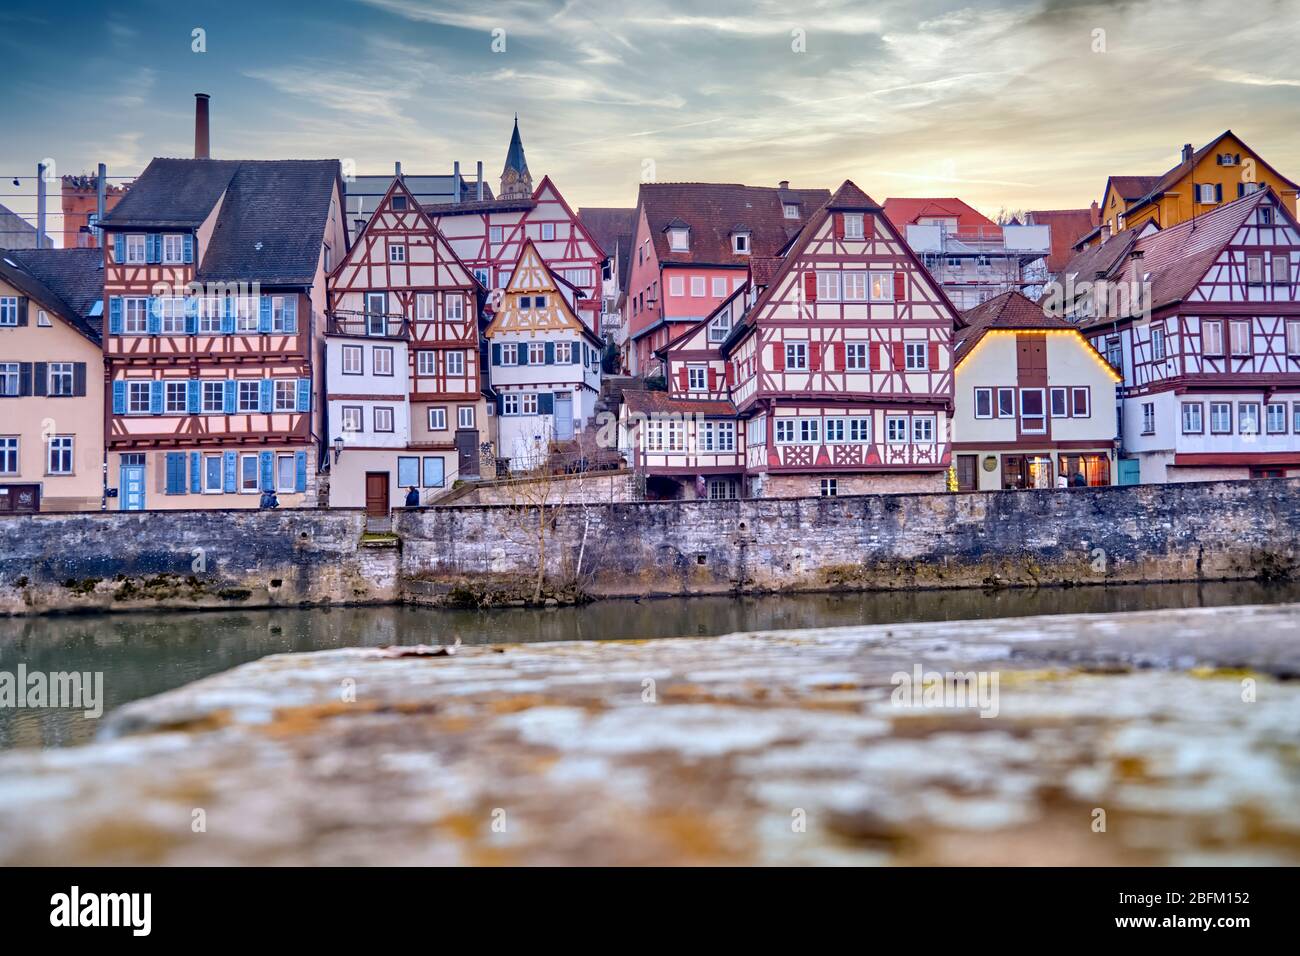 Half-timbered houses on the river, Medieval, Schwaebisch Hall, evening mood at sunset, romantic Stock Photo